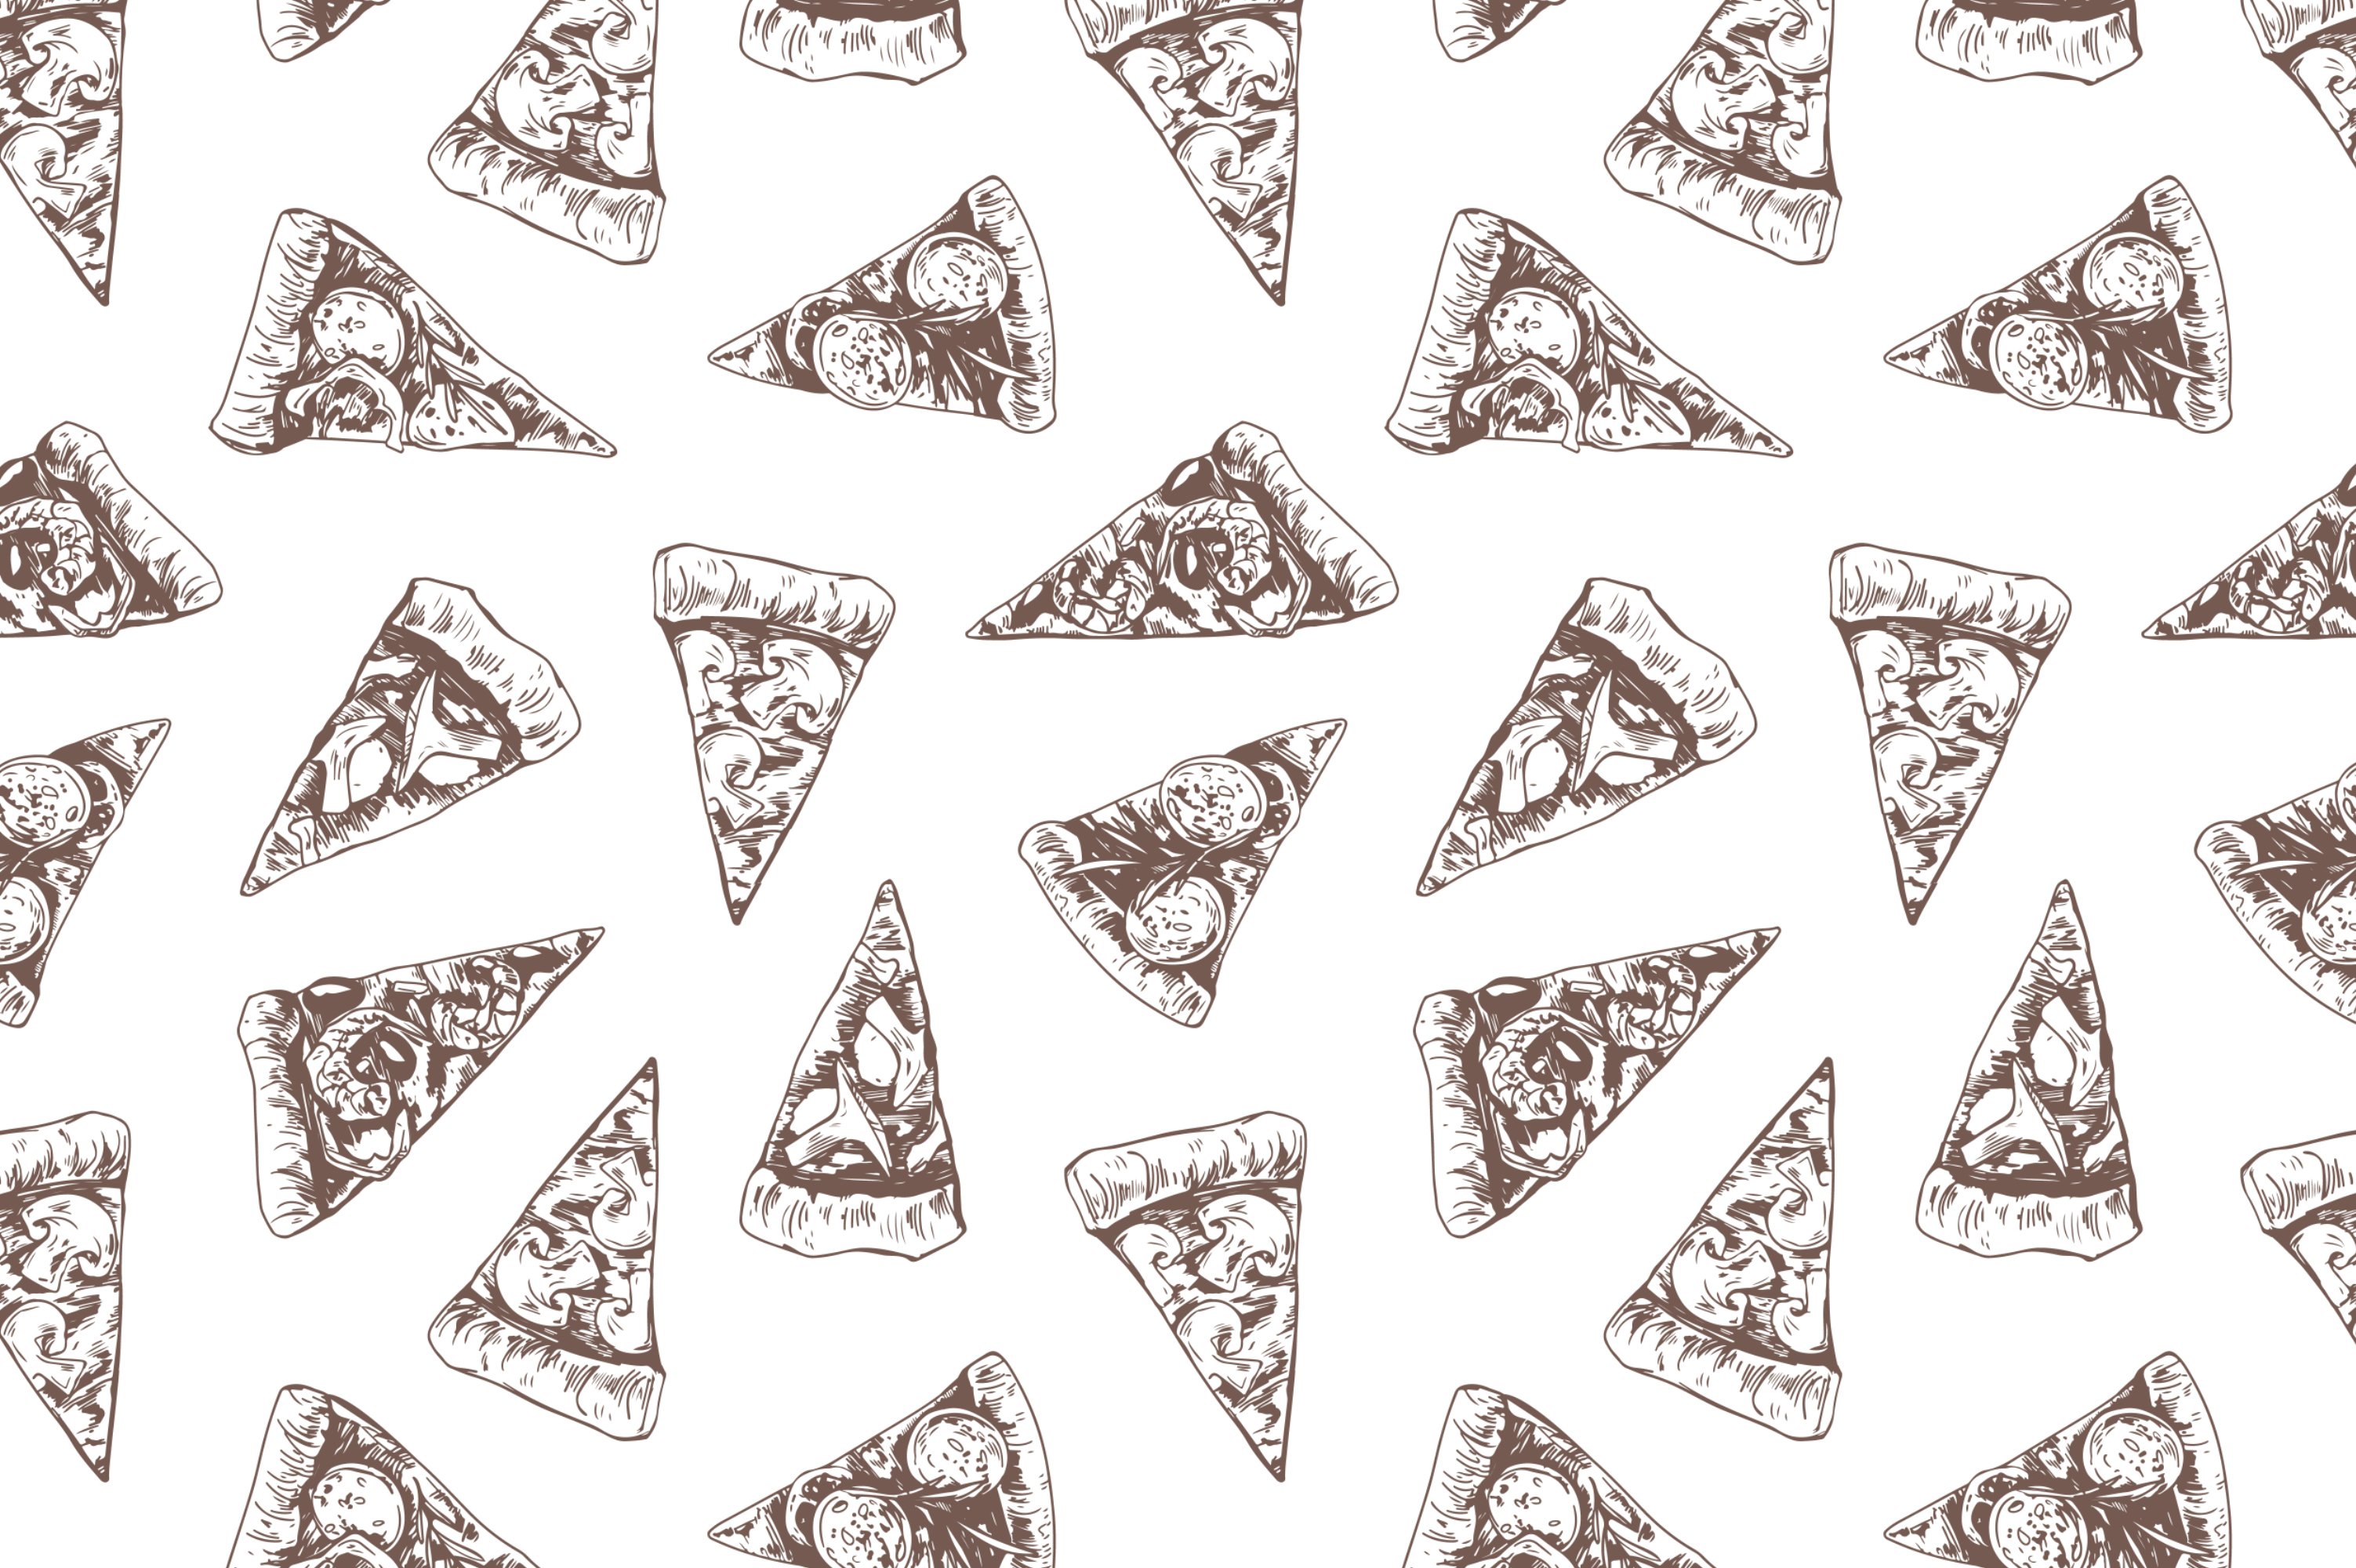 pizza and pizza ingridients patterns 5 91